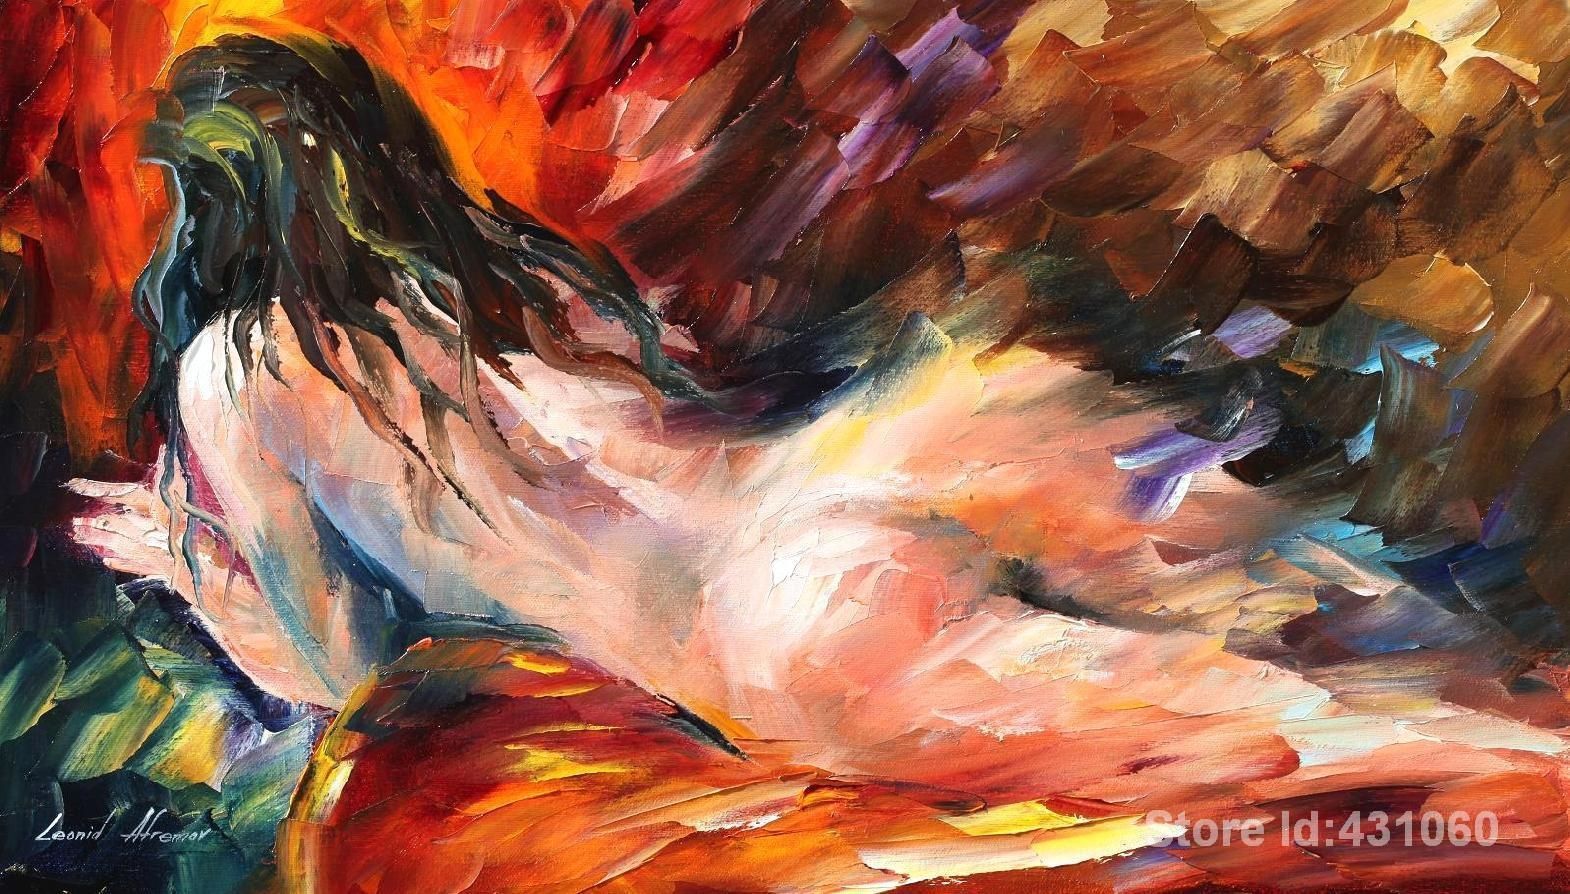 Sensual Artwork Etsy Sensual Paintings For The Bedroom ~ Cryp Intended For Sensual Wall Art (View 14 of 20)